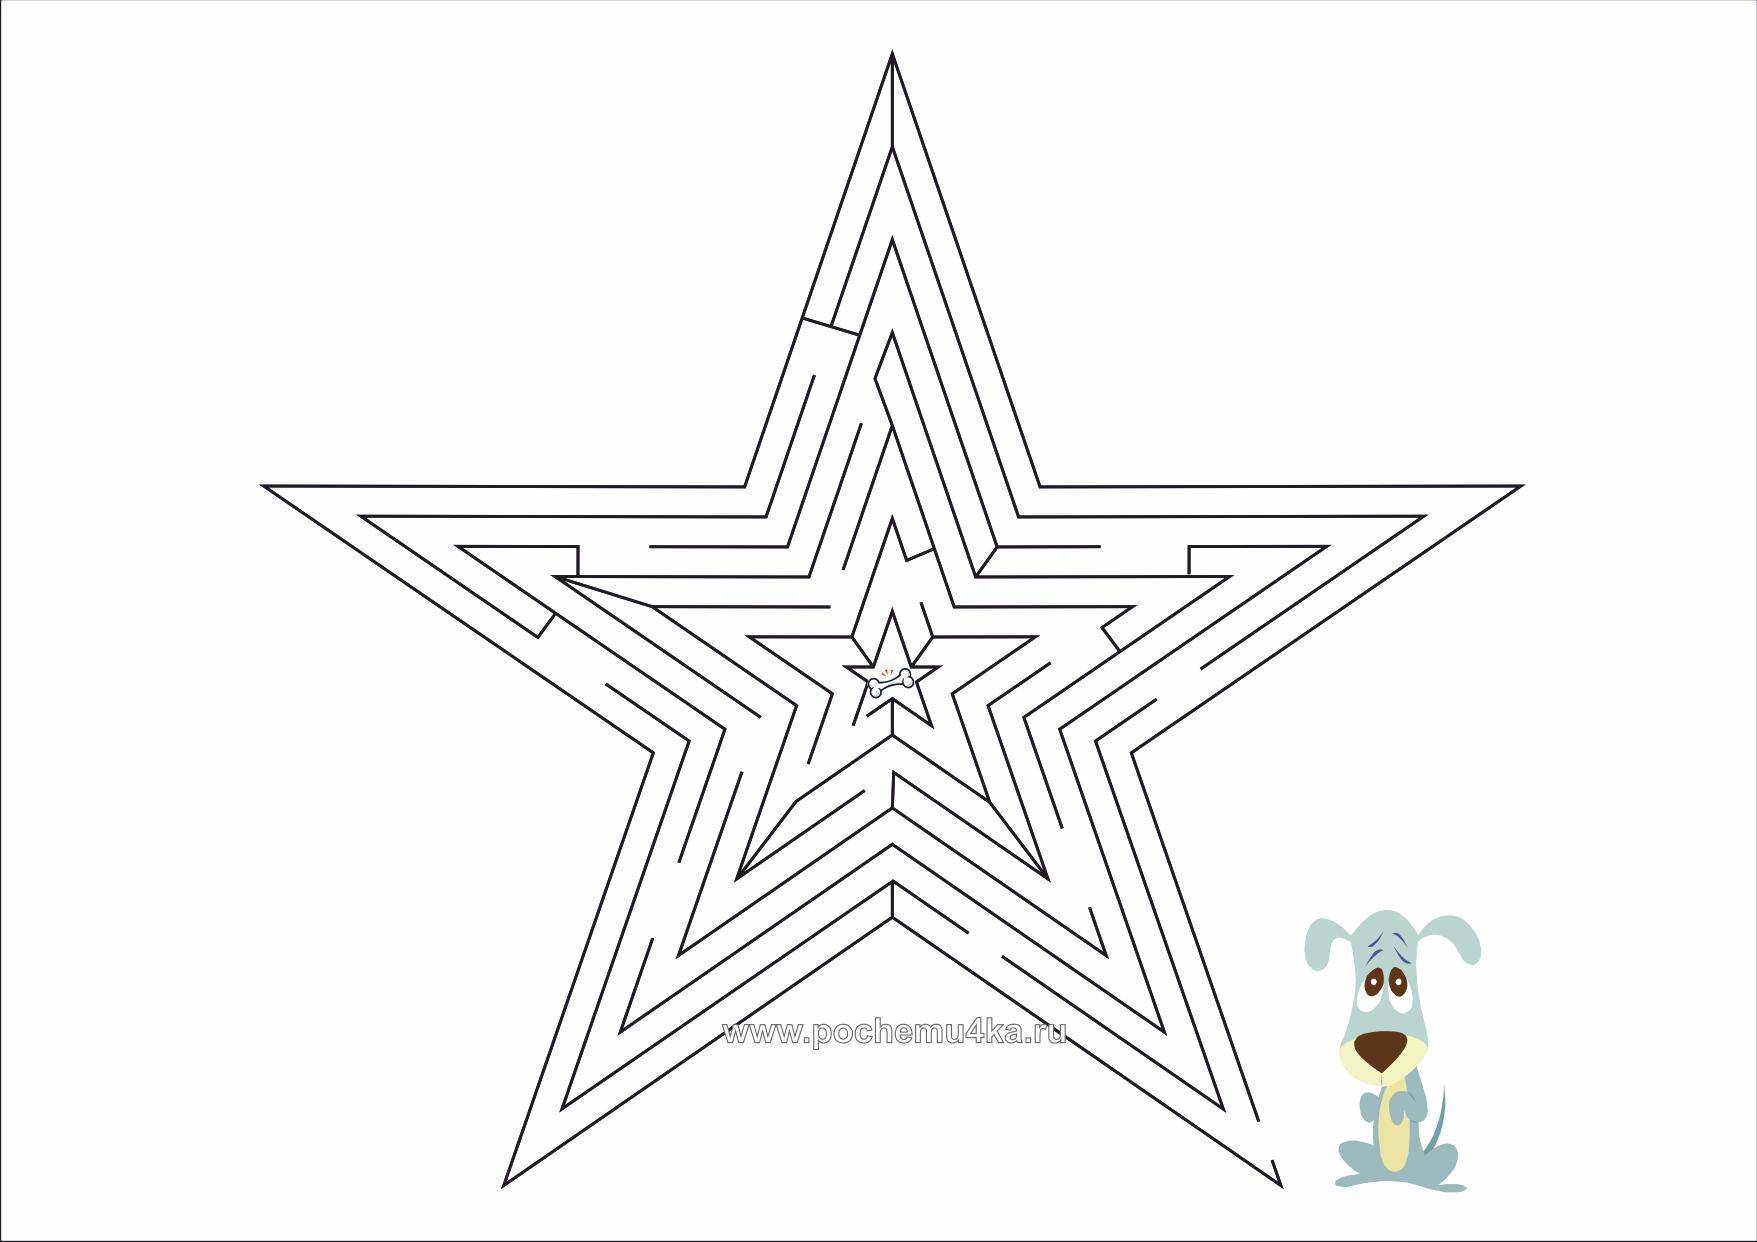 Coloring Maze star. Category mazes. Tags:  Star.